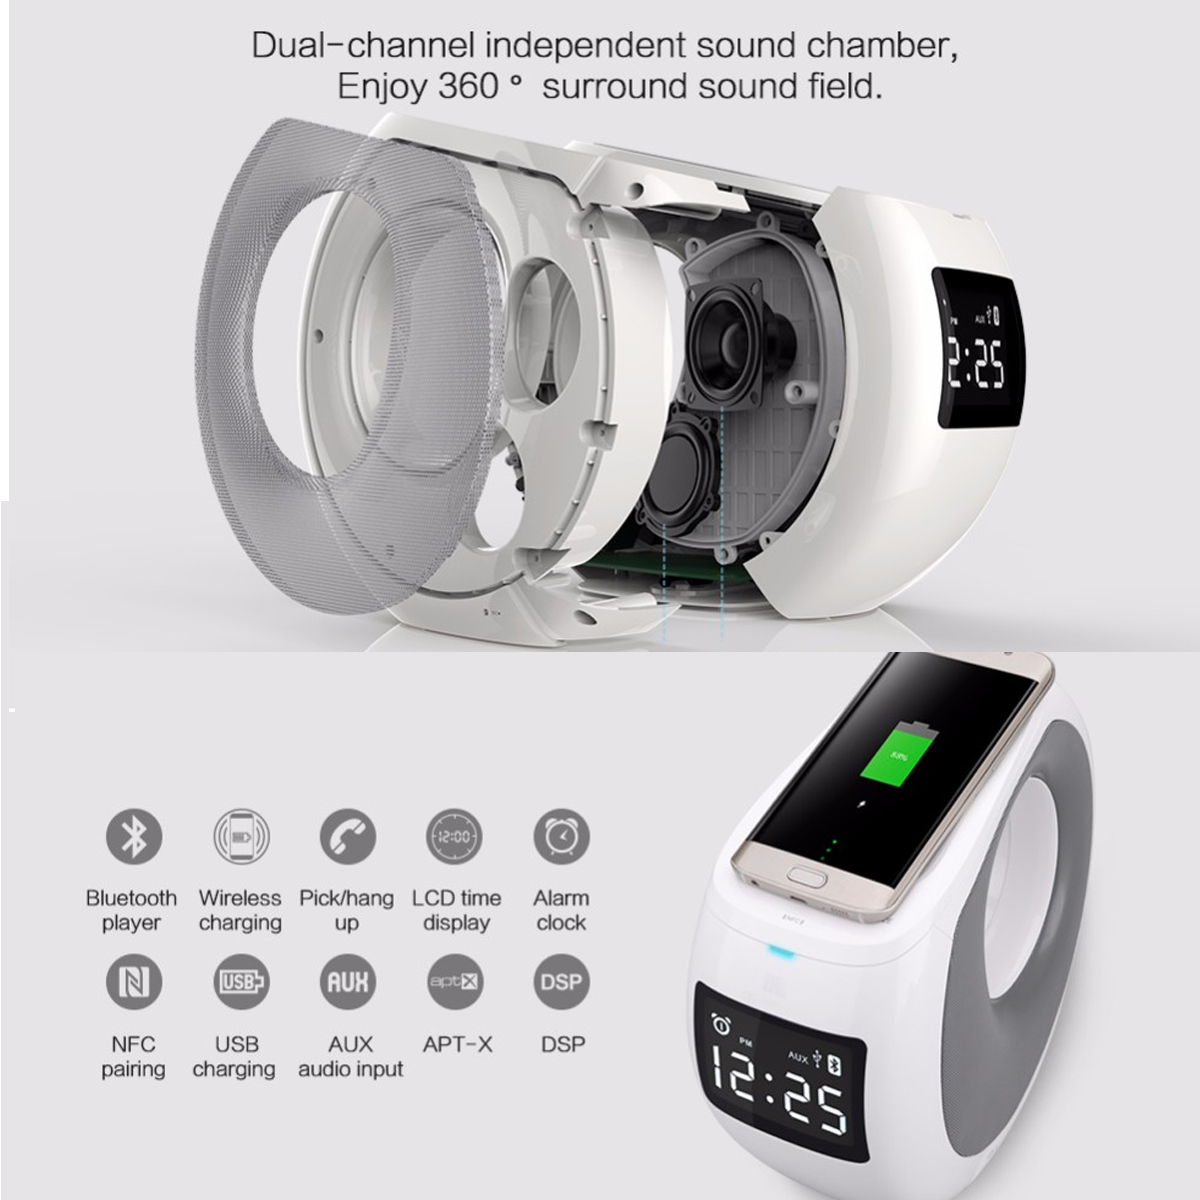 NILLKIN-2in1-Wireless-bluetooth-Speaker-Qi-Wireless-Charger-with-Mic--NFC-Function-Music-Alarm-Cloc-1275279-3